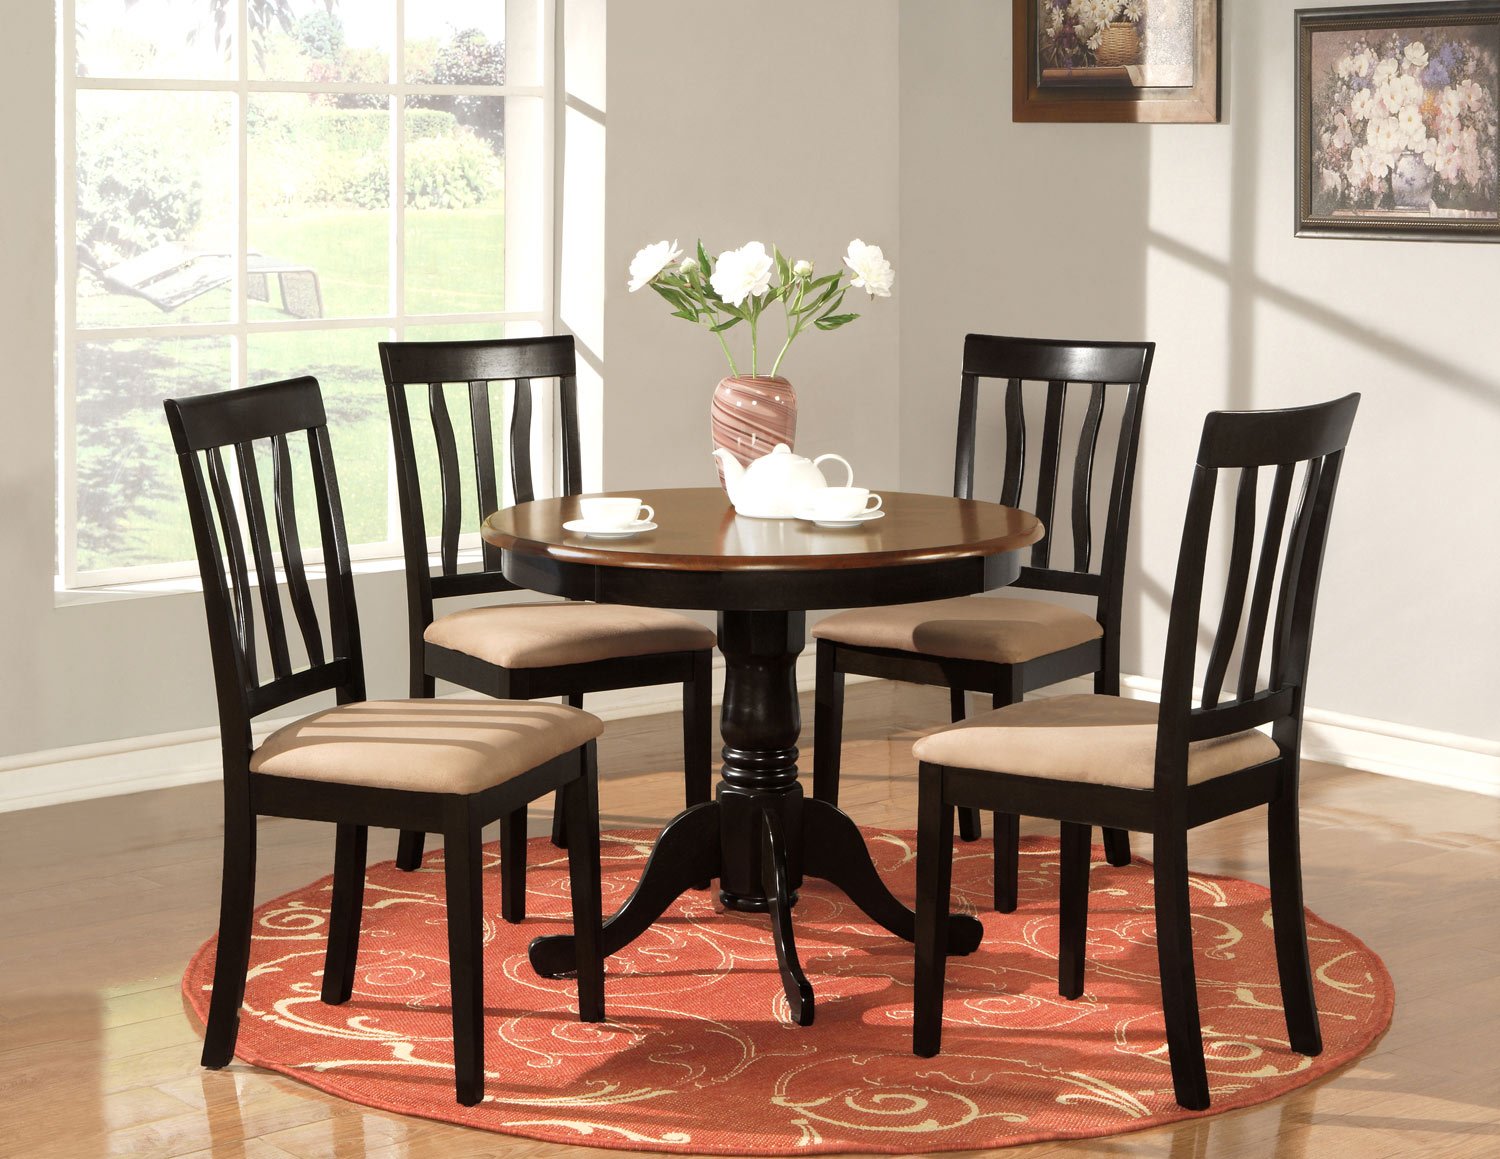 5 Pc Antique Round Dinette Kitchen Table Set Black And Brown